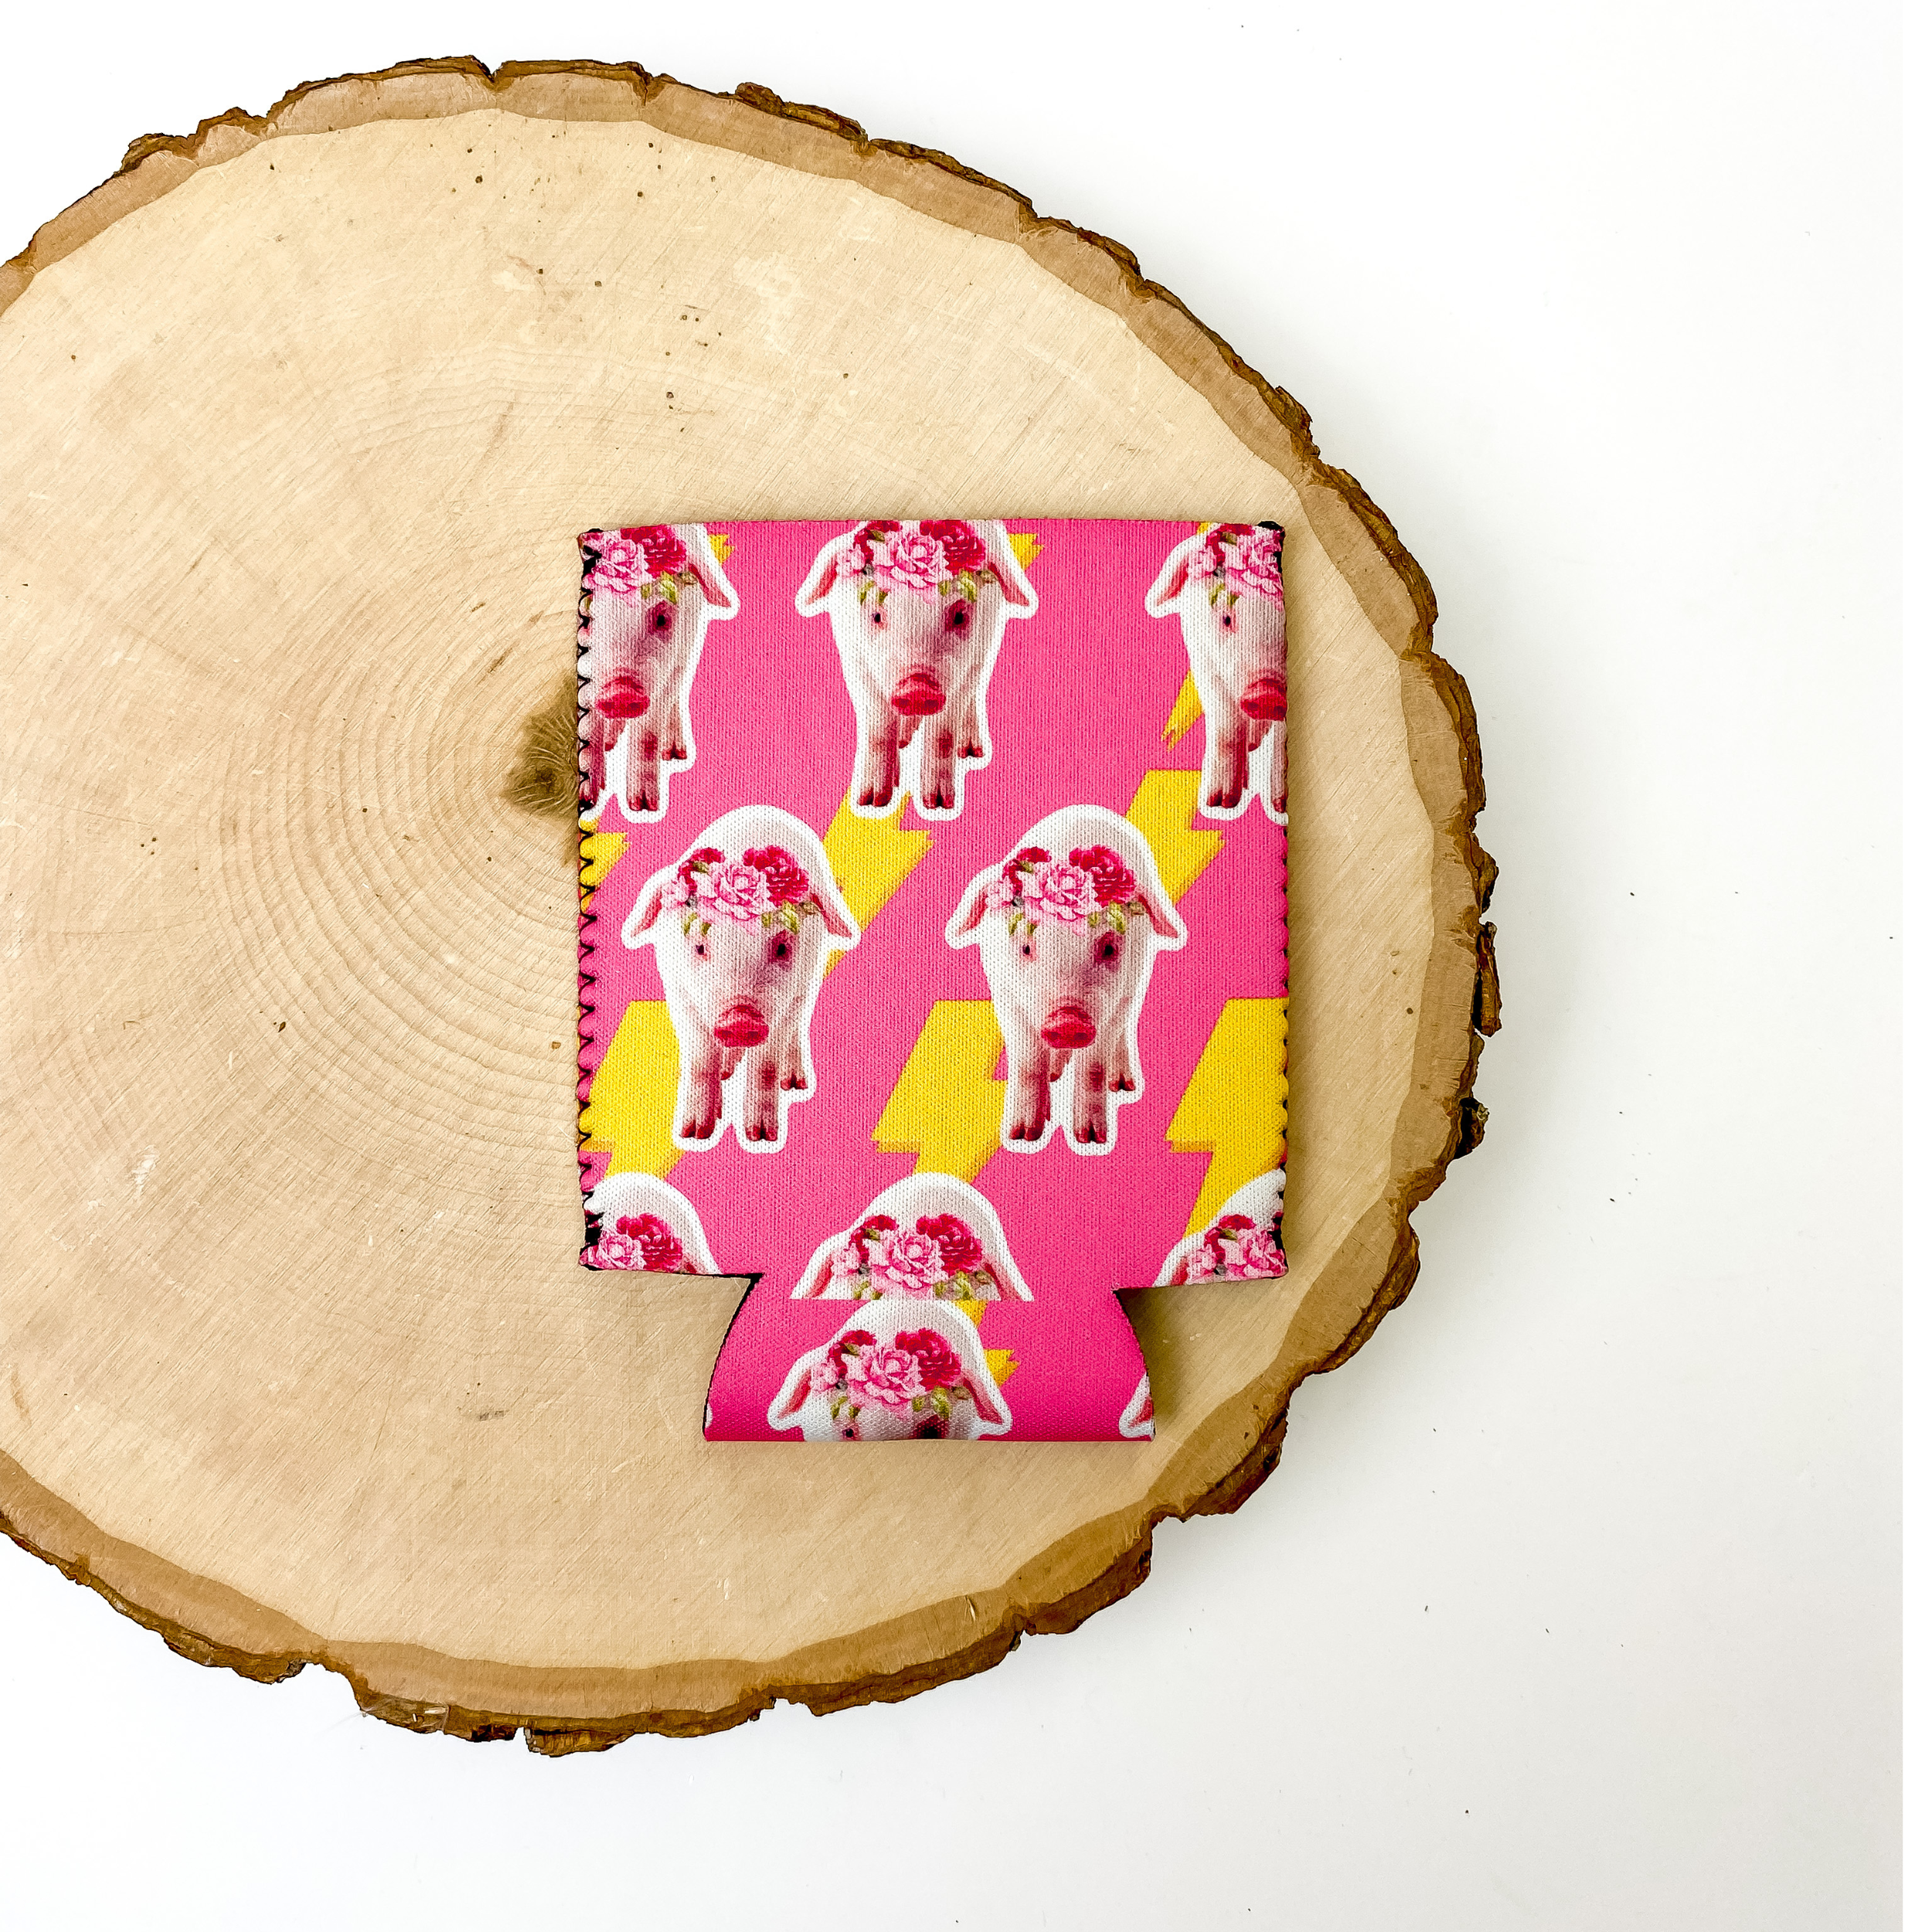 Hot pink koozie with pigs and yellow lighting bolts all over the koozie. This koozie is pictured on a piece of wood on a white background.